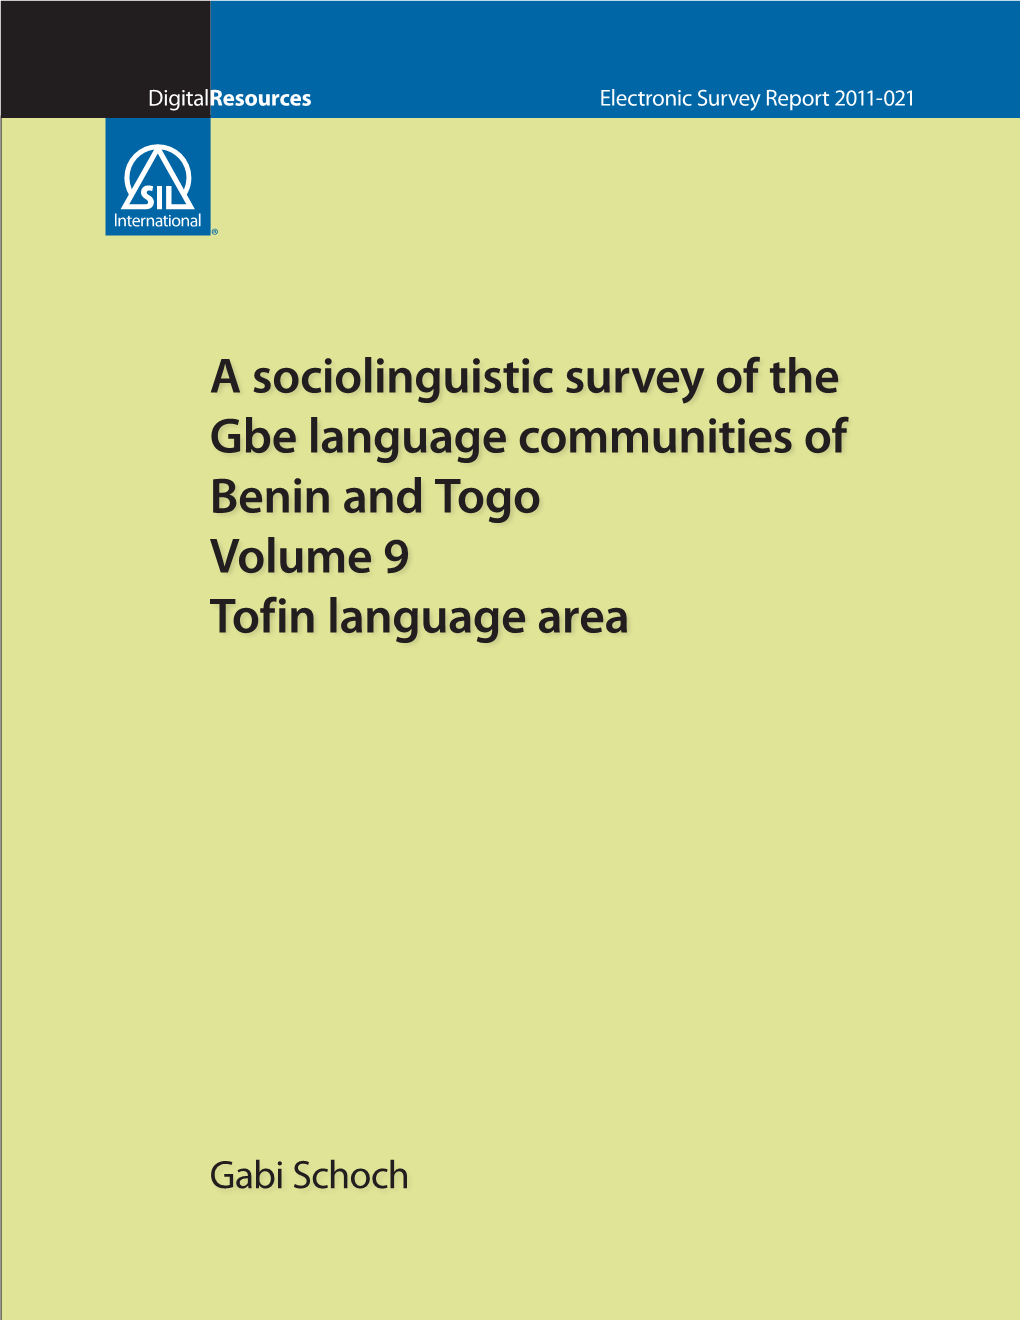 A Sociolinguistic Survey of the Gbe Language Communities of Benin and Togo Volume 9 Tofin Language Area